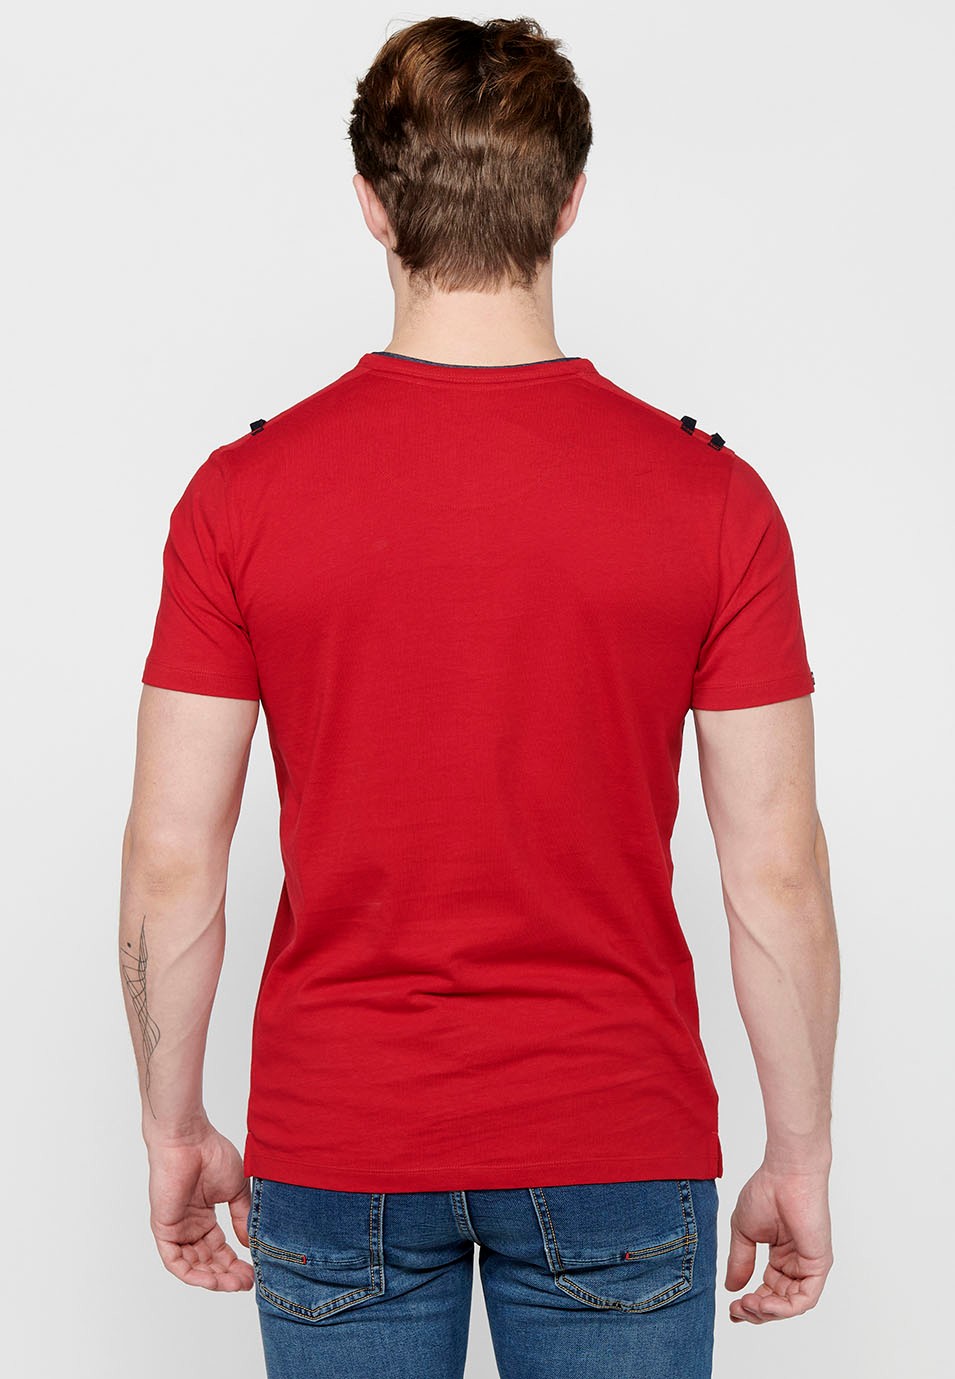 Short Sleeve Cotton T-shirt with Round Neck with Buttoned Opening in Red for Men 2